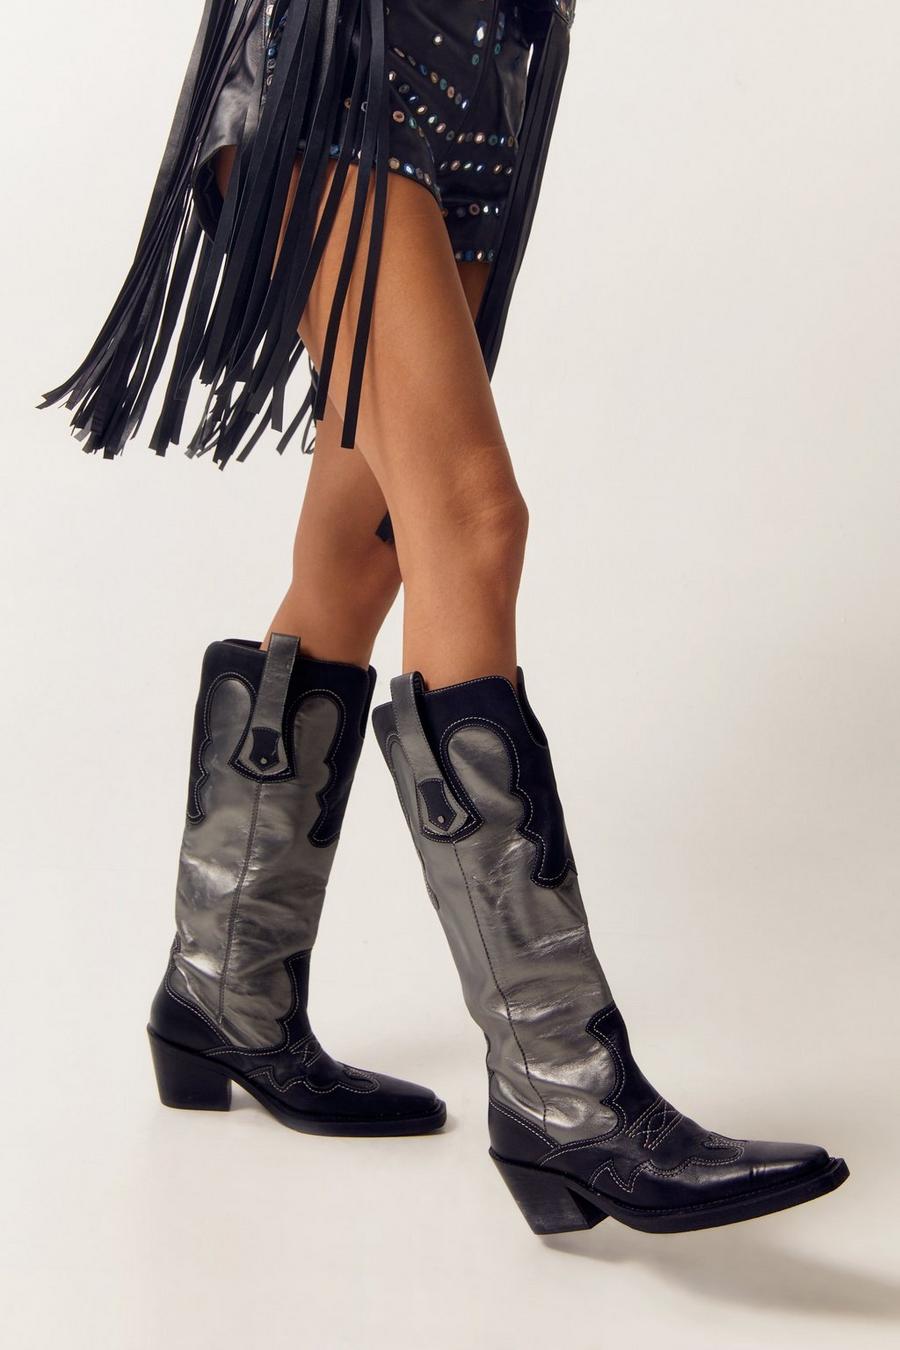 Real Leather Metallic Colour Block Cowboy Boots